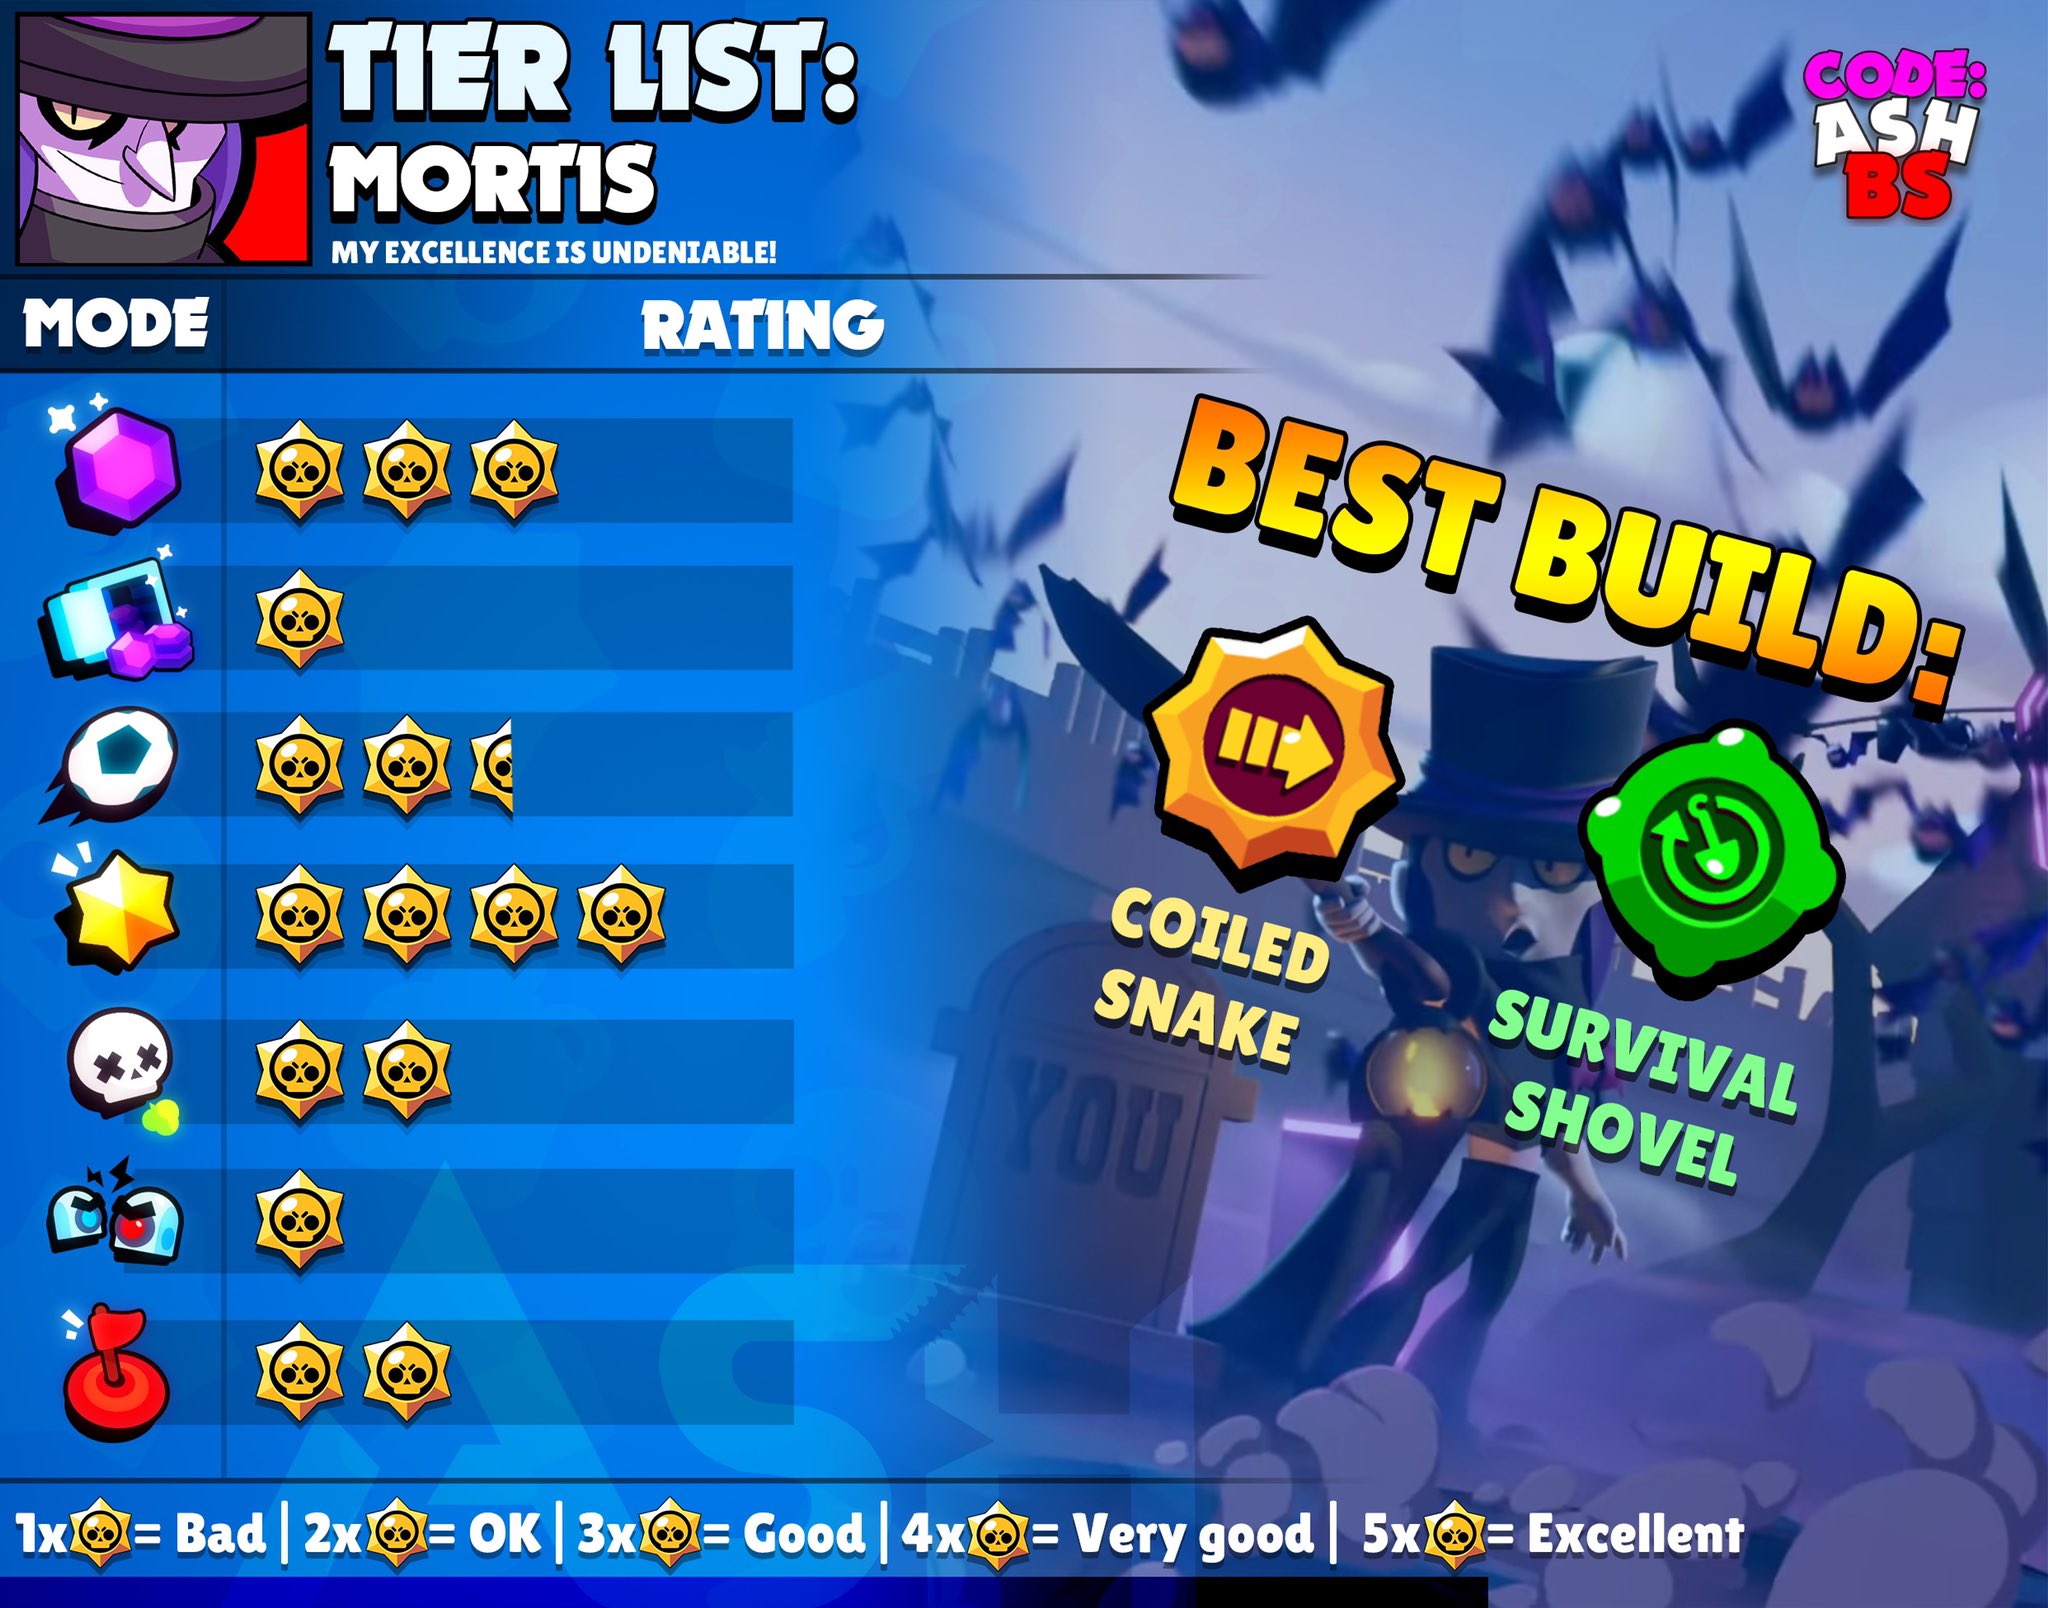 Code Ashbs On Twitter Mortis Tier List For Every Game Mode Best Build And Best Maps With Suggested Comps Which Brawler Should I Do Next Mortis Brawlstars Https T Co Suzpgvjb33 - why mortis bad brawl stars